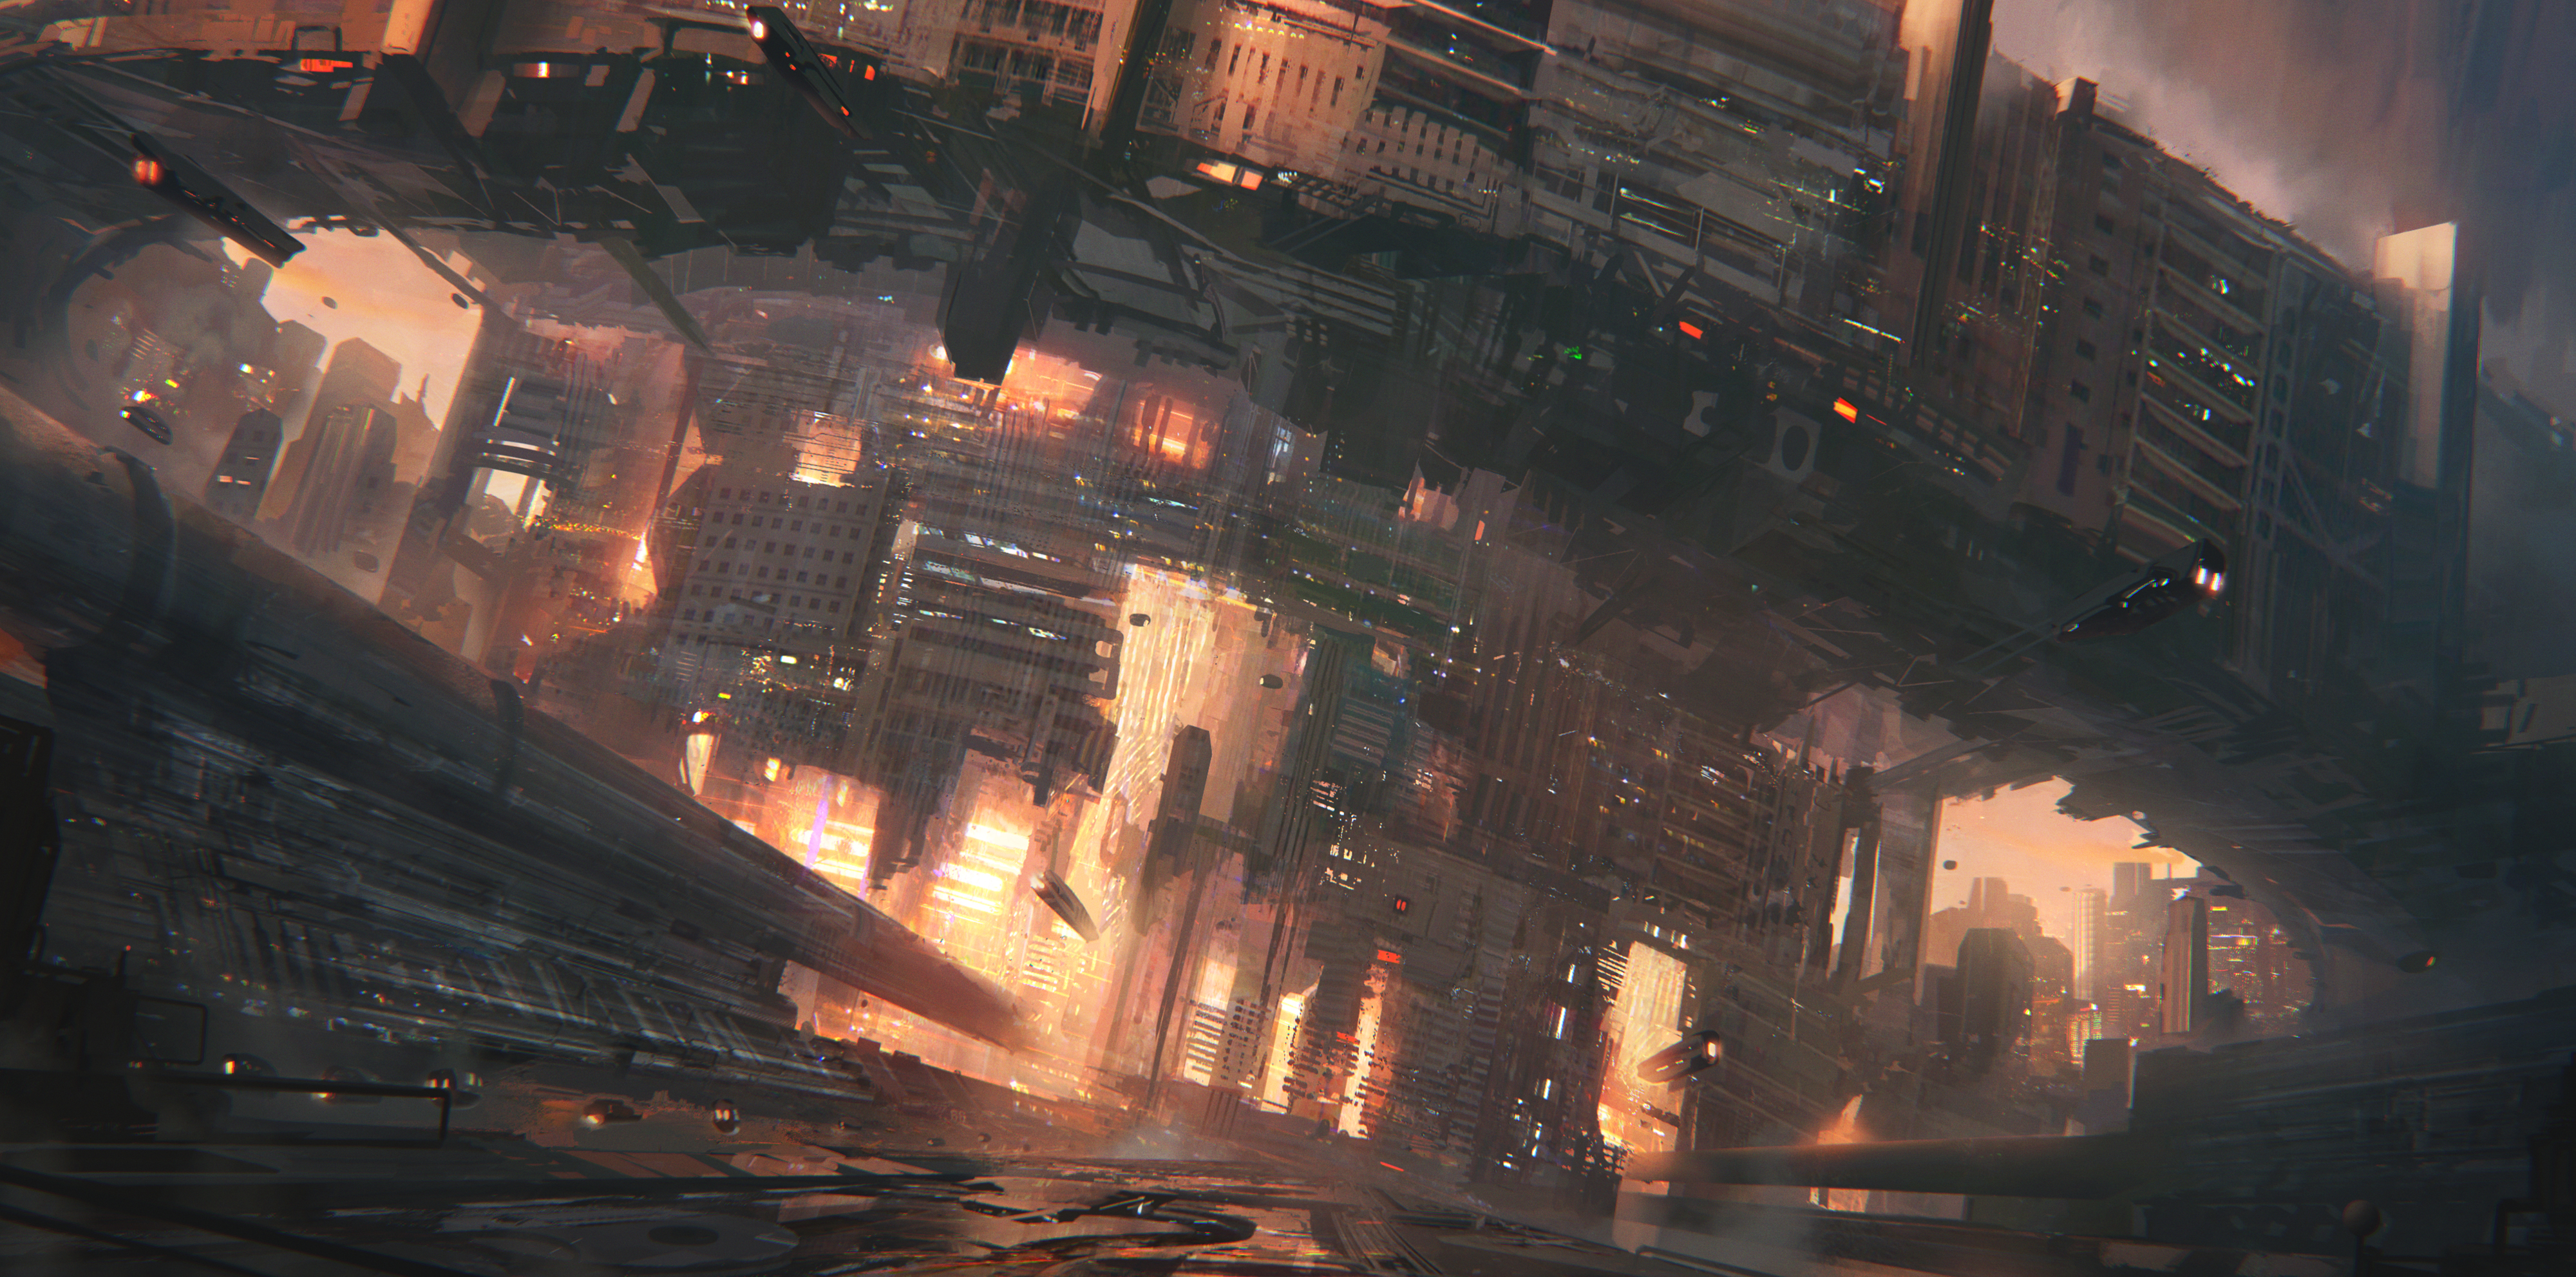 A city called Furnace by Leon Tukker